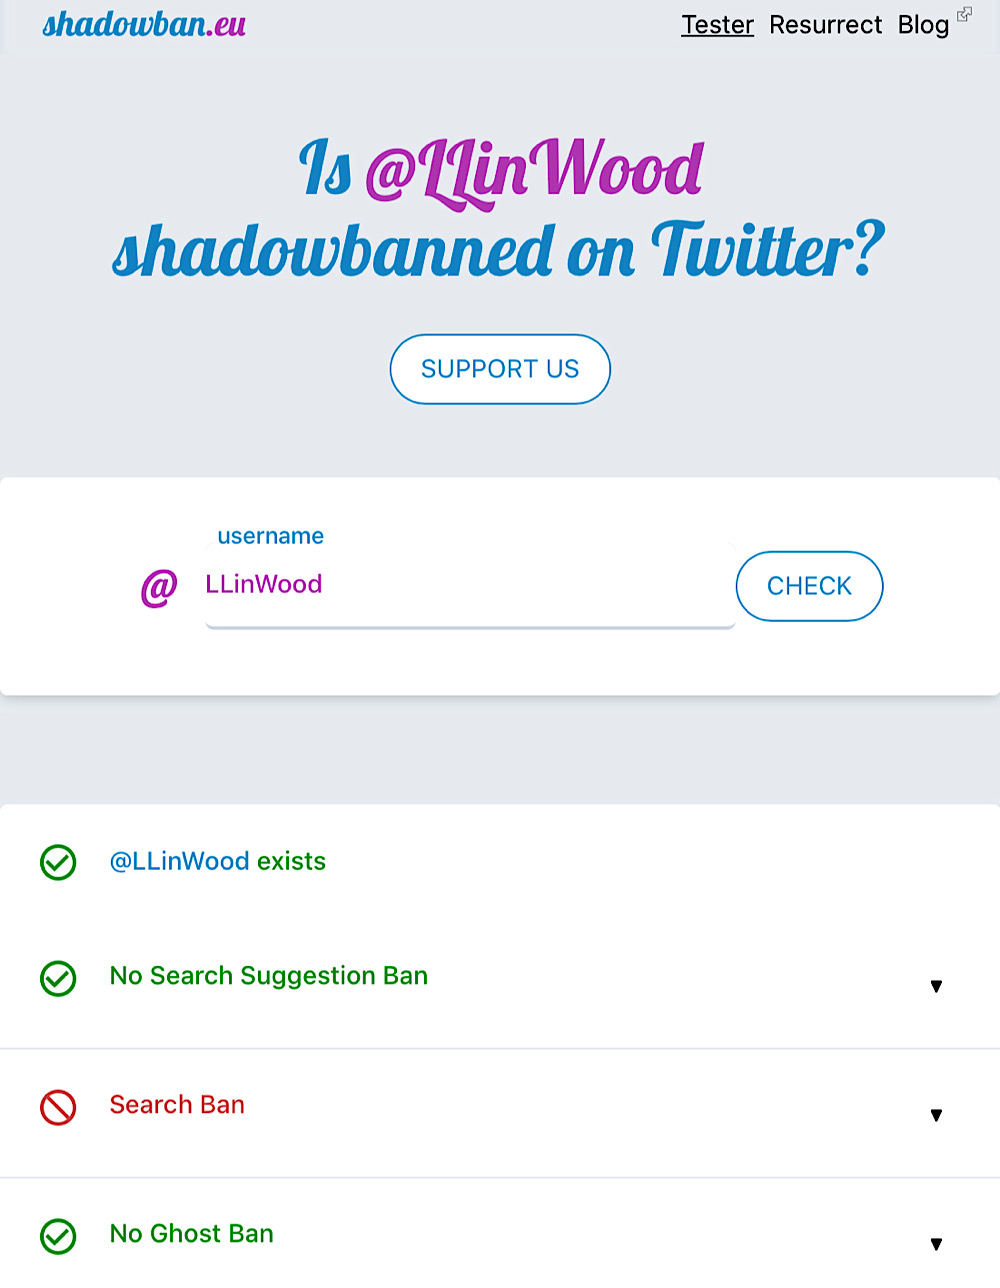 @LLinWood's username has been shadowbanned from Twitter search (Twitter Shadown Test)